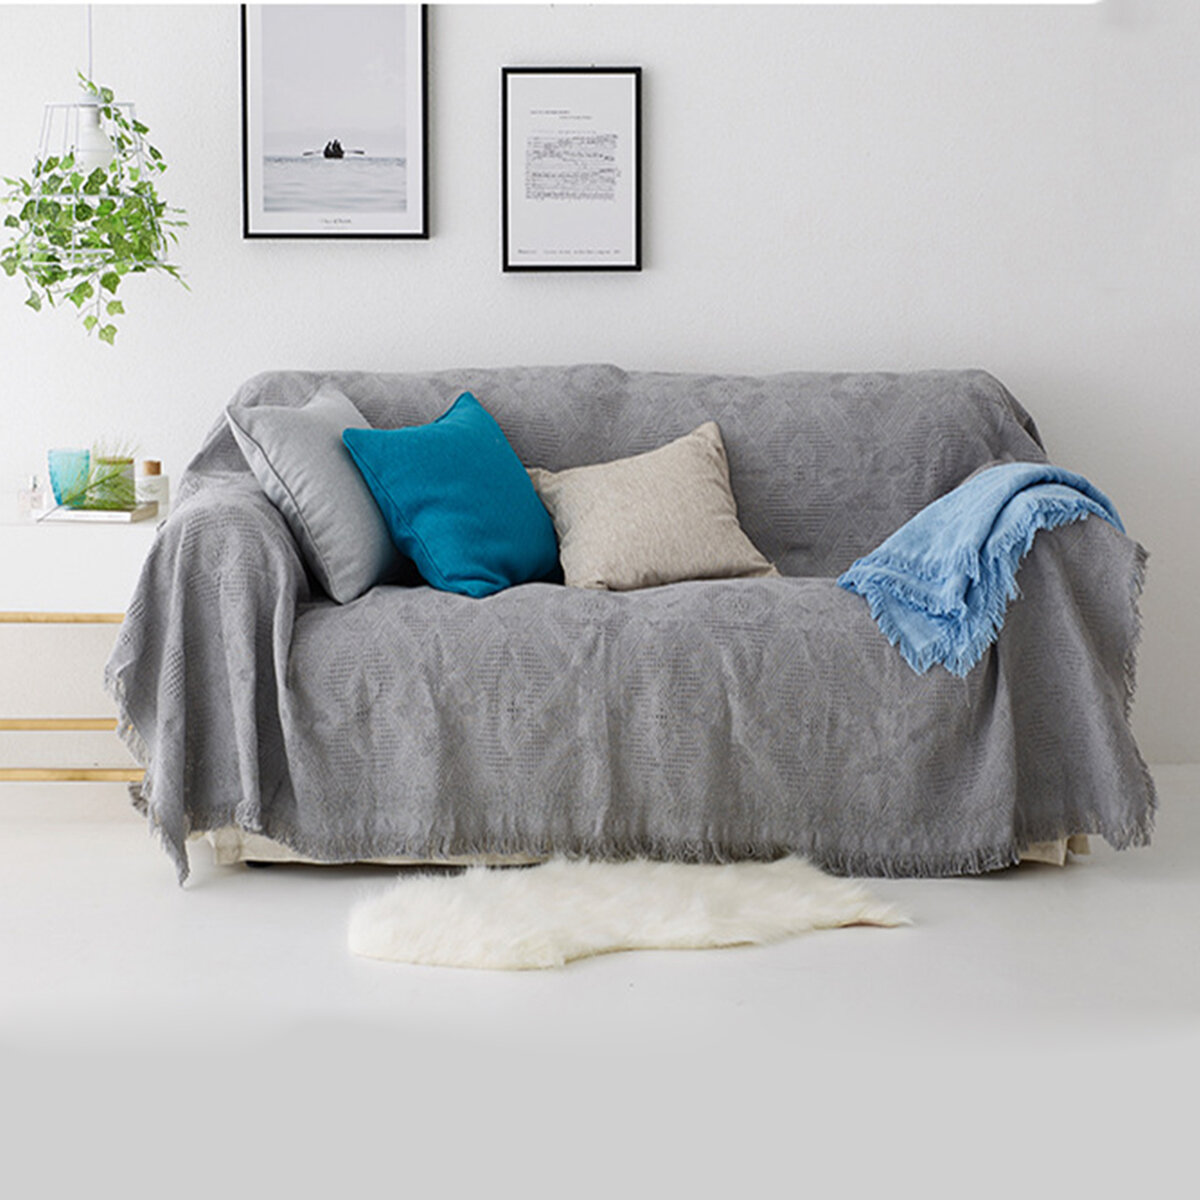 Details about   Throw Blanket Multifunction Sofa Covers Tassel Dust Cover Blankets for Bed